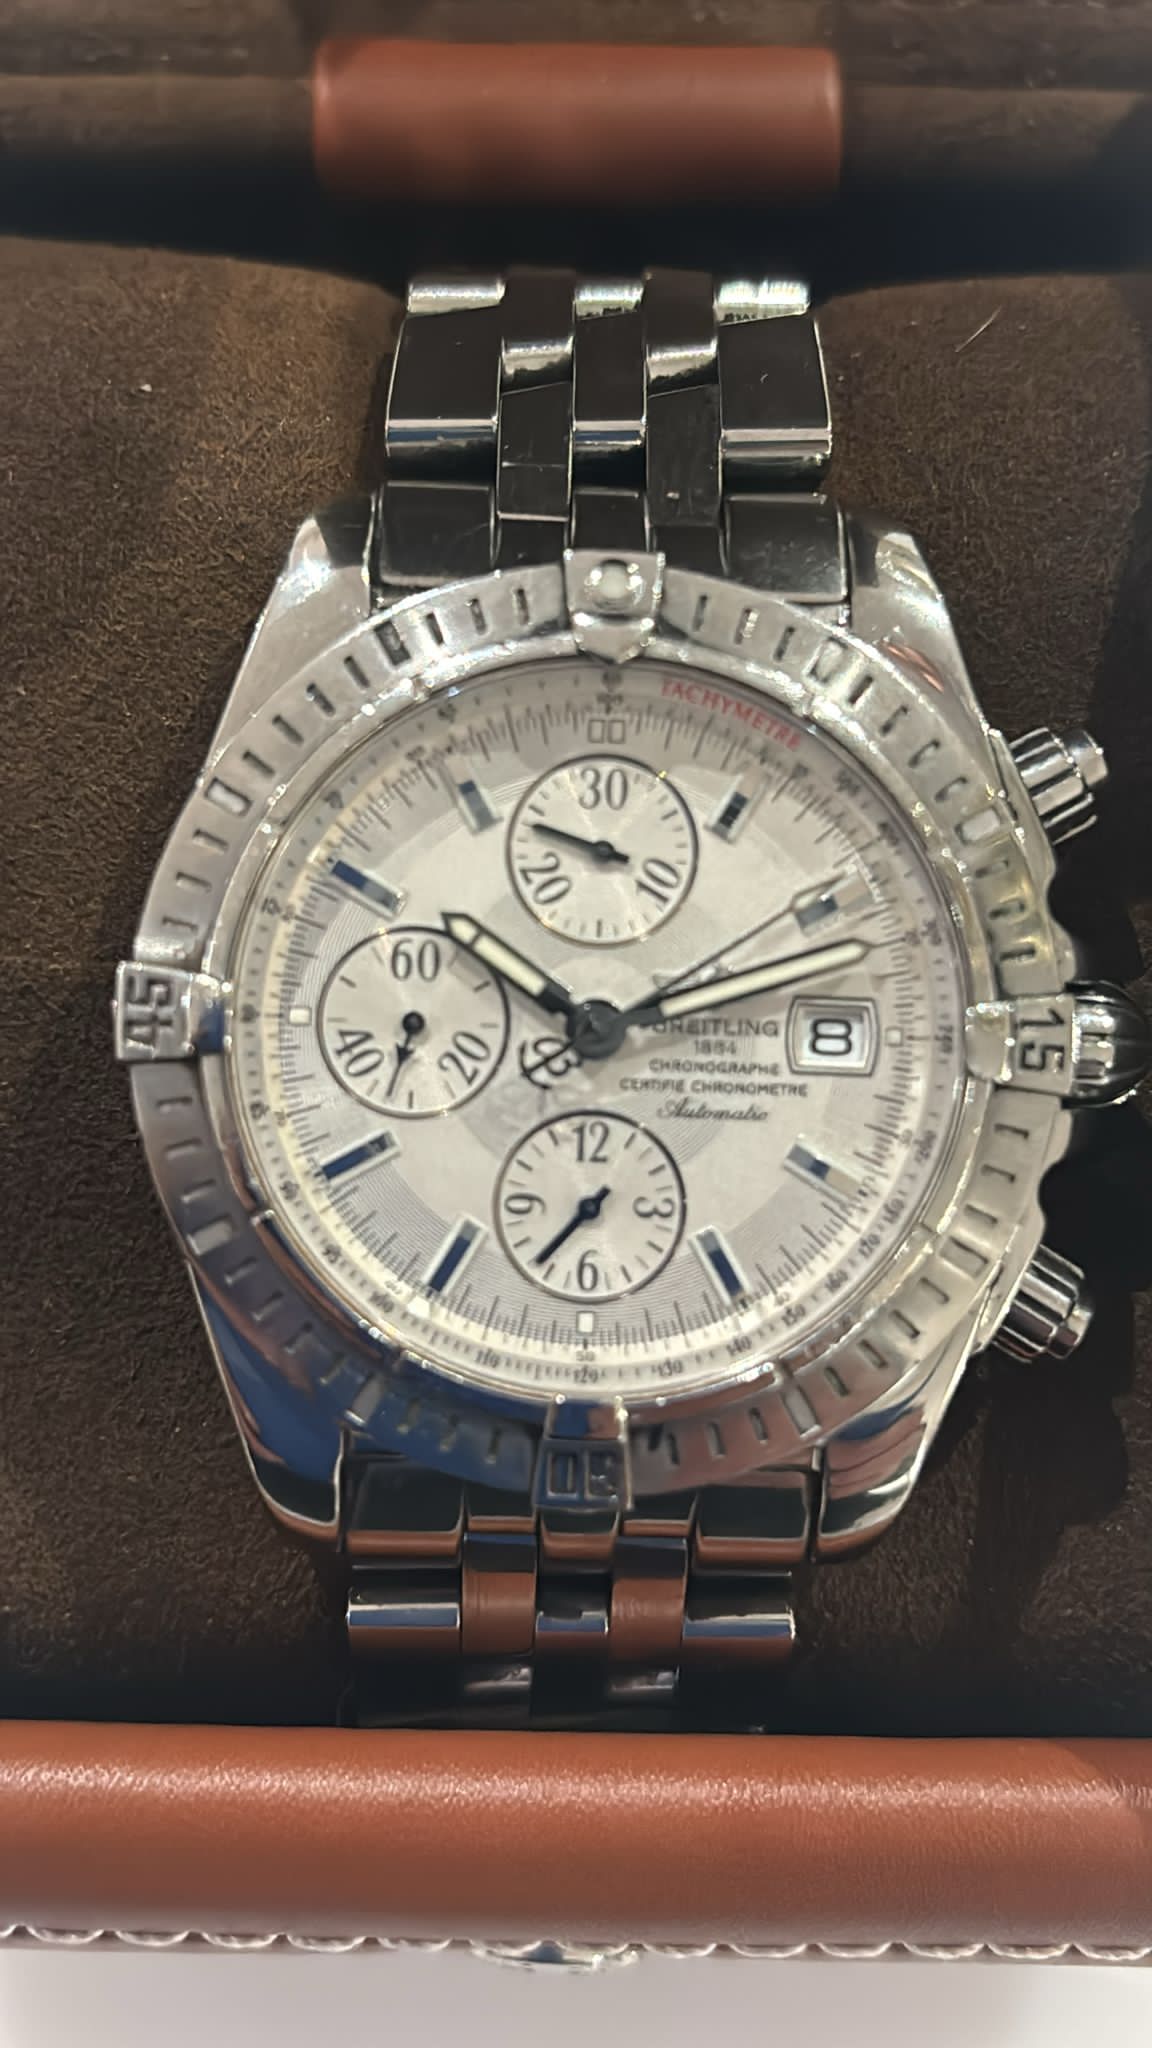 Breitling Chronomat Evolution A13356 Watch - Image 3 of 12